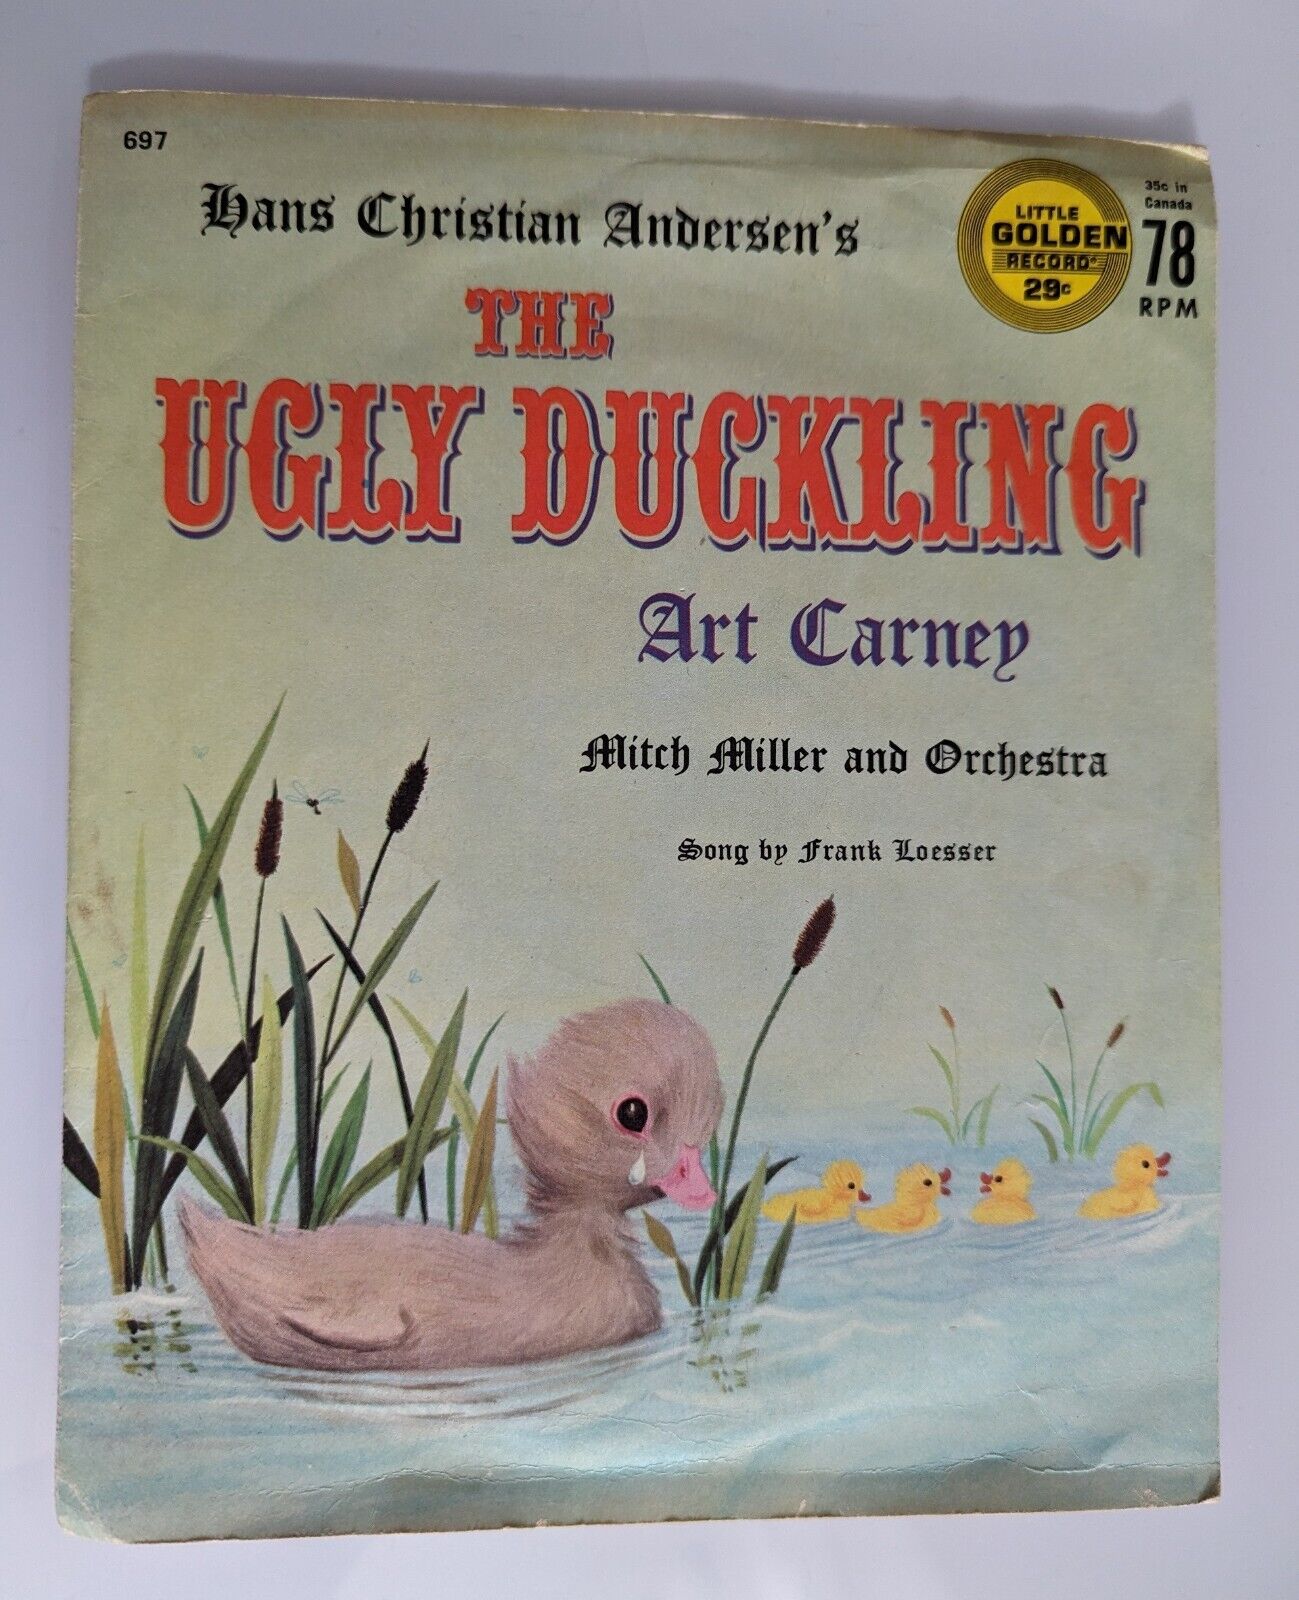 1962 The Ugly Duckling Art Caney Mitch Miller Orchestra Little Golden Record 7"